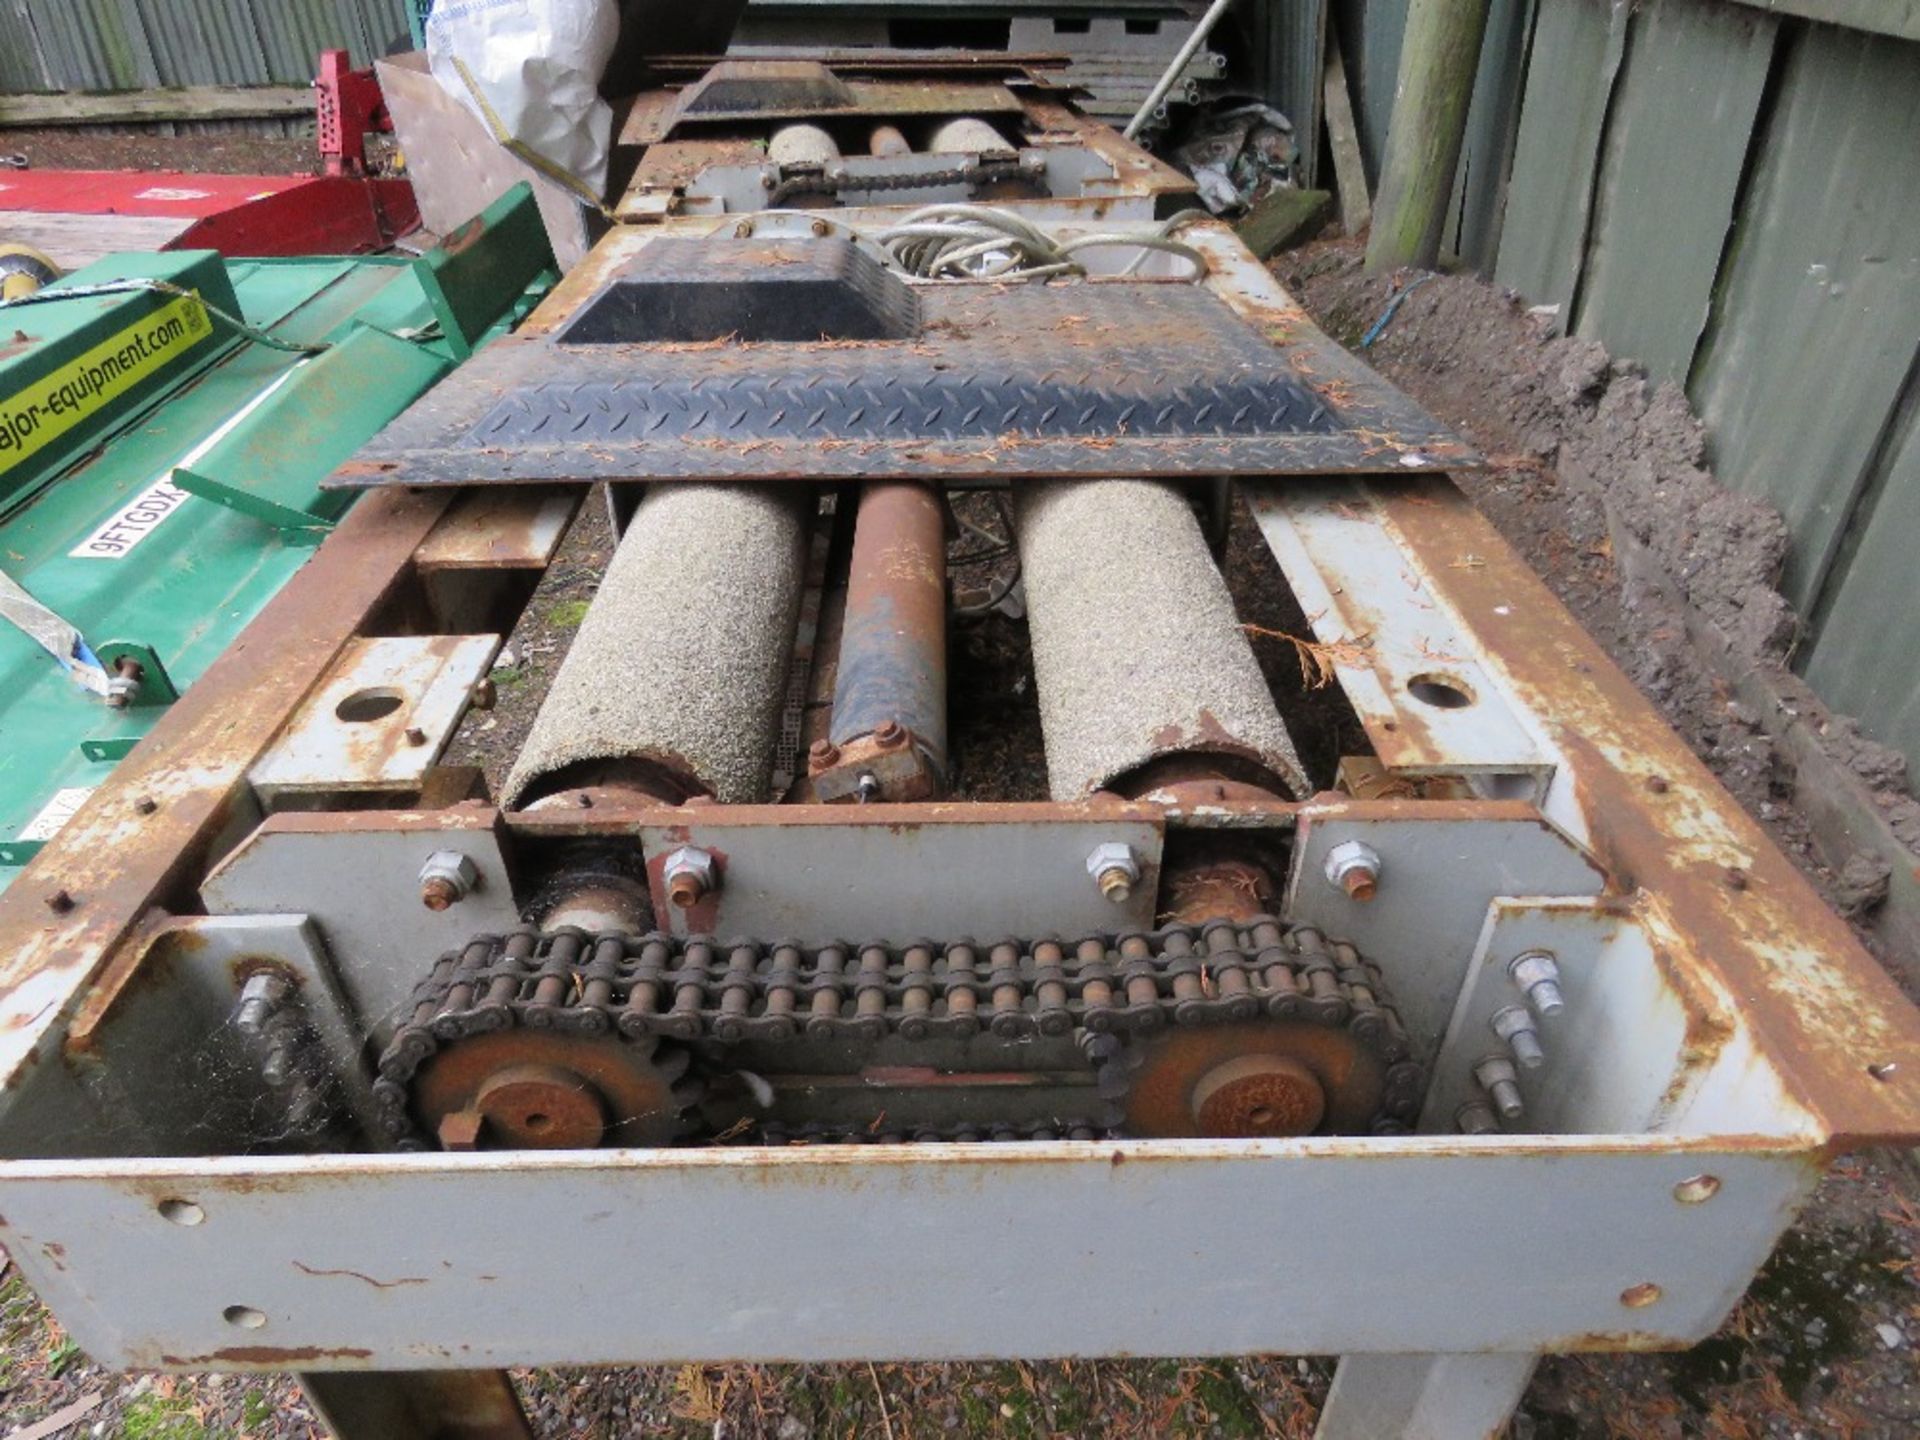 COMMERCIAL VEHICLE BRAKE TEST ROLLERS WITH ASSOCIATED EQUIPMENT. BELIEVED TO BE EWJ MAKE. - Image 3 of 7